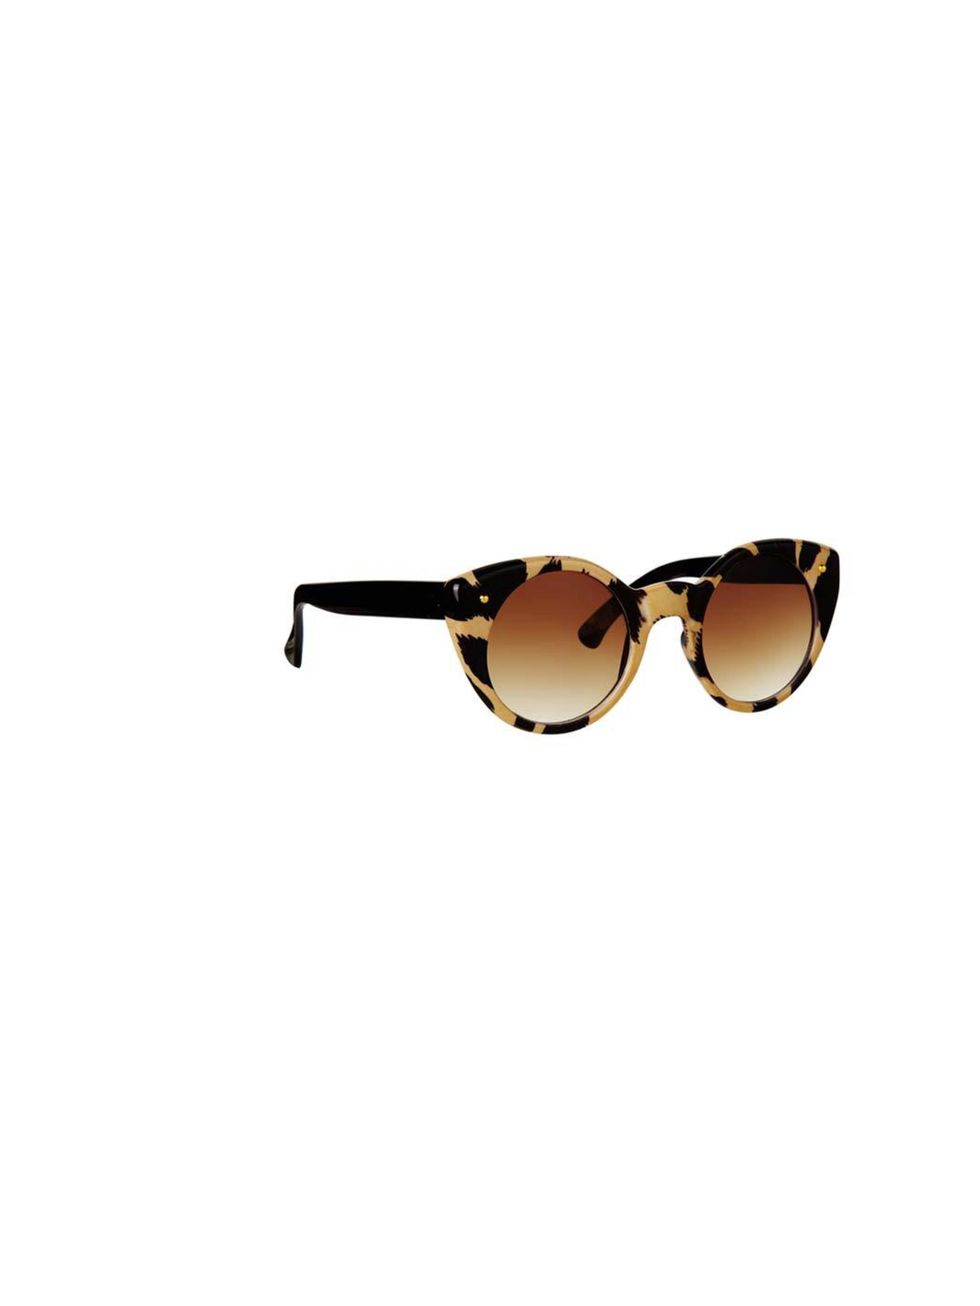 <p>The abstract leopard print of these classic cat-eye sunglasses will look great worn with clashing prints... <a href="http://www.urbanoutfitters.co.uk/leopard-cat-eye-sunglasses/invt/5758425482011/&colour=Brown">Urban Outfitters</a> sunglasses, £16 </p>